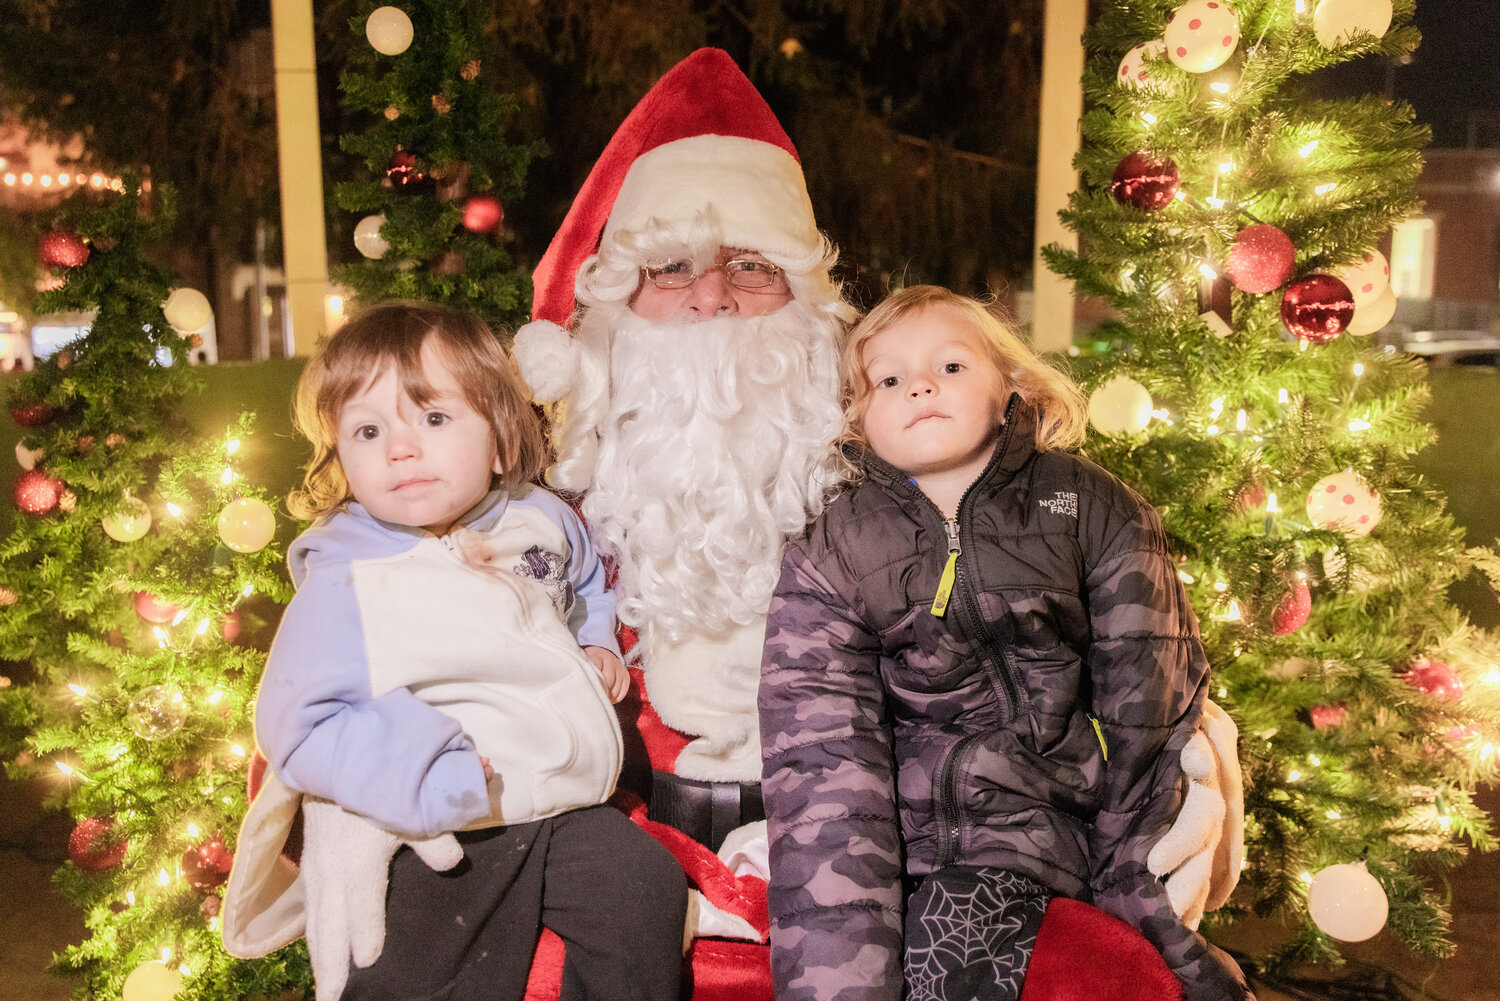 Jasper and Lucas Jordan pose for a photo with Santa at George Washington Park in Centralia during a tree lighting ceremony on Friday, Nov. 24.